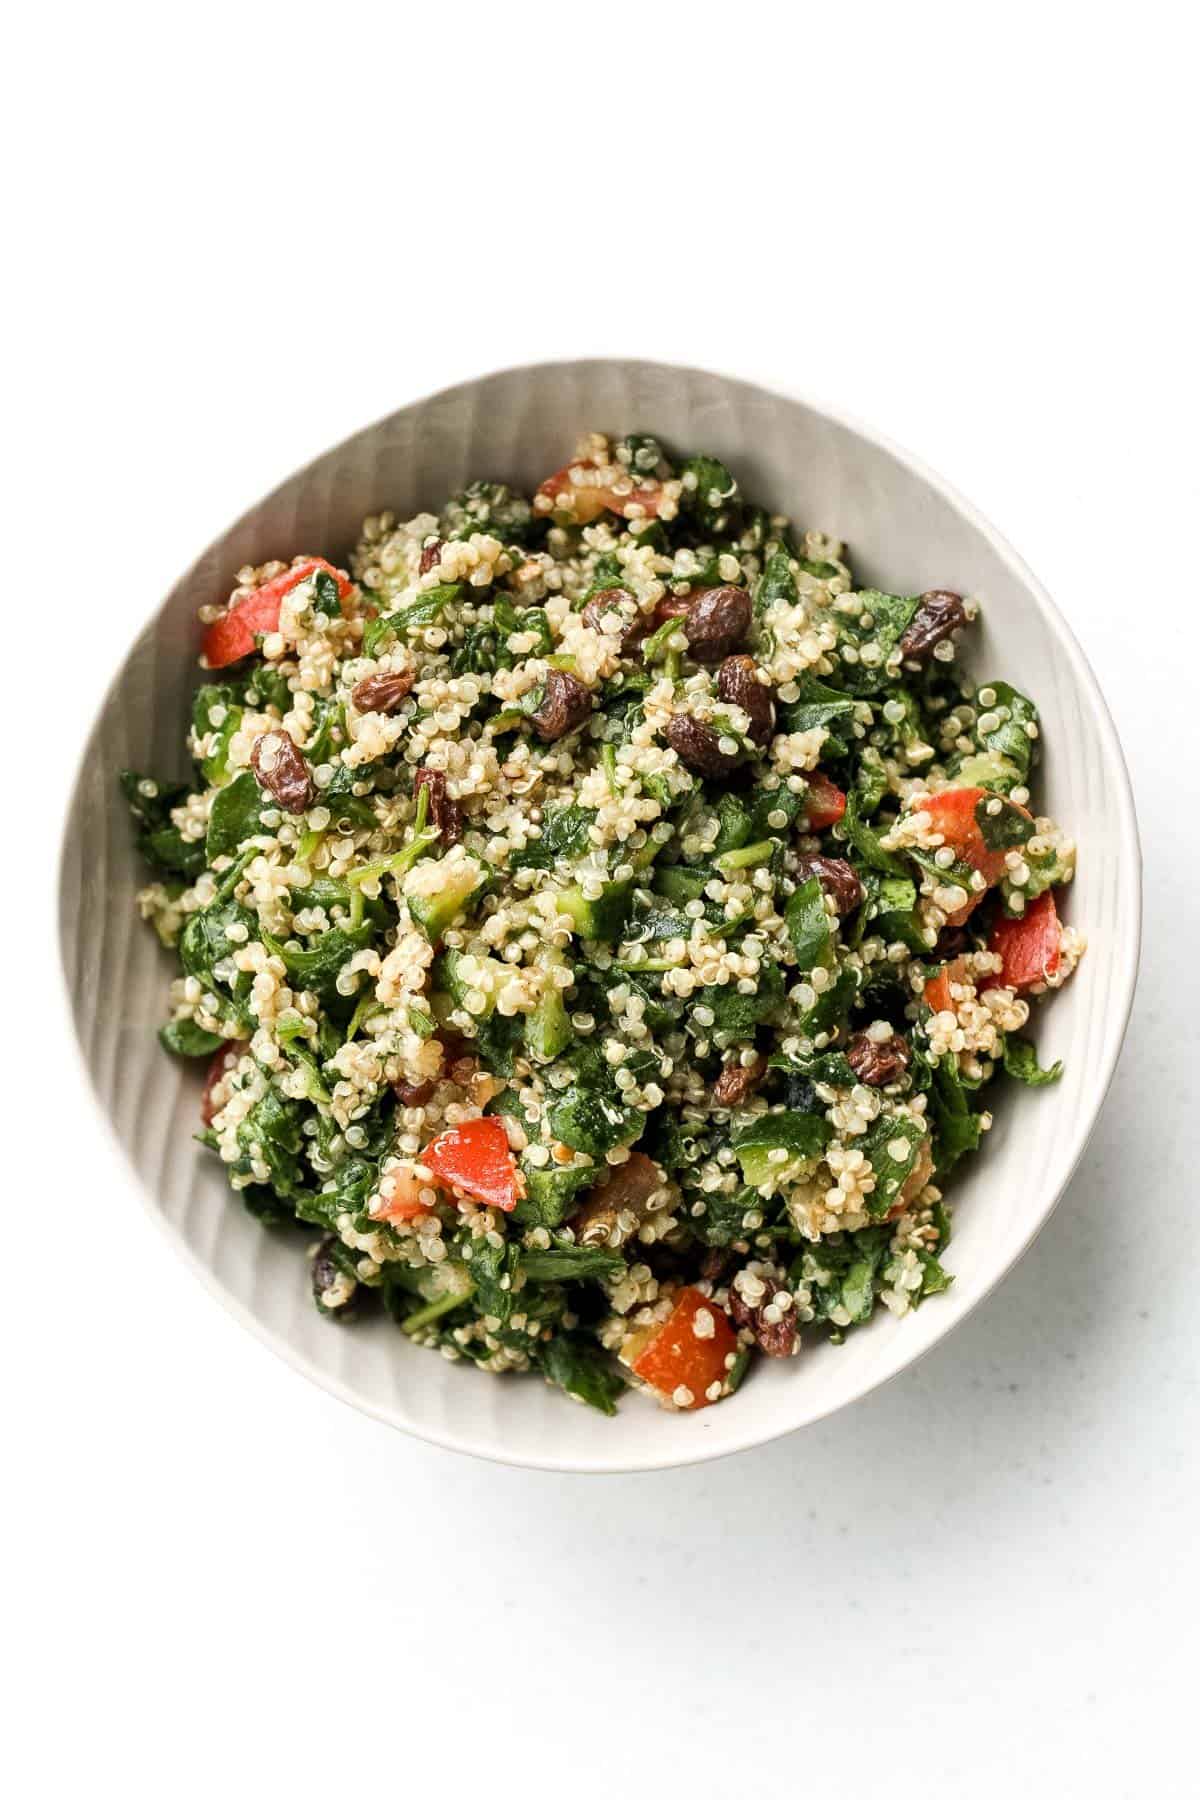 Take a bite into this refreshing, gluten-free quinoa and spinach salad bursting with colourful tomatoes, cucumbers and raisins. | aheadofthyme.com